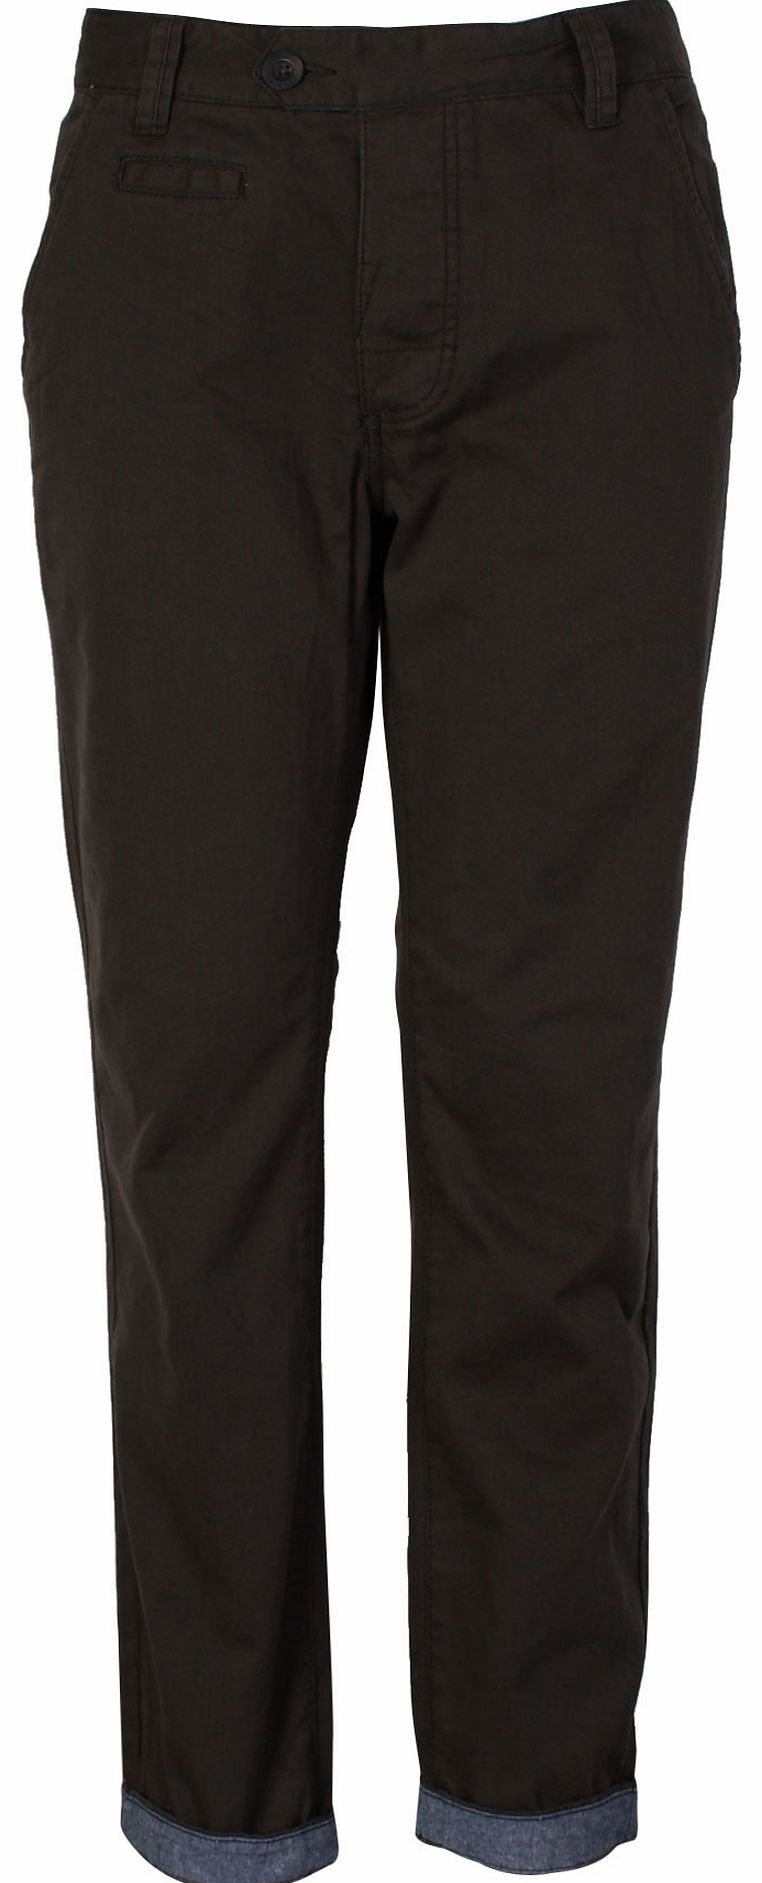 Tokyo laundry Casual Twill Trousers